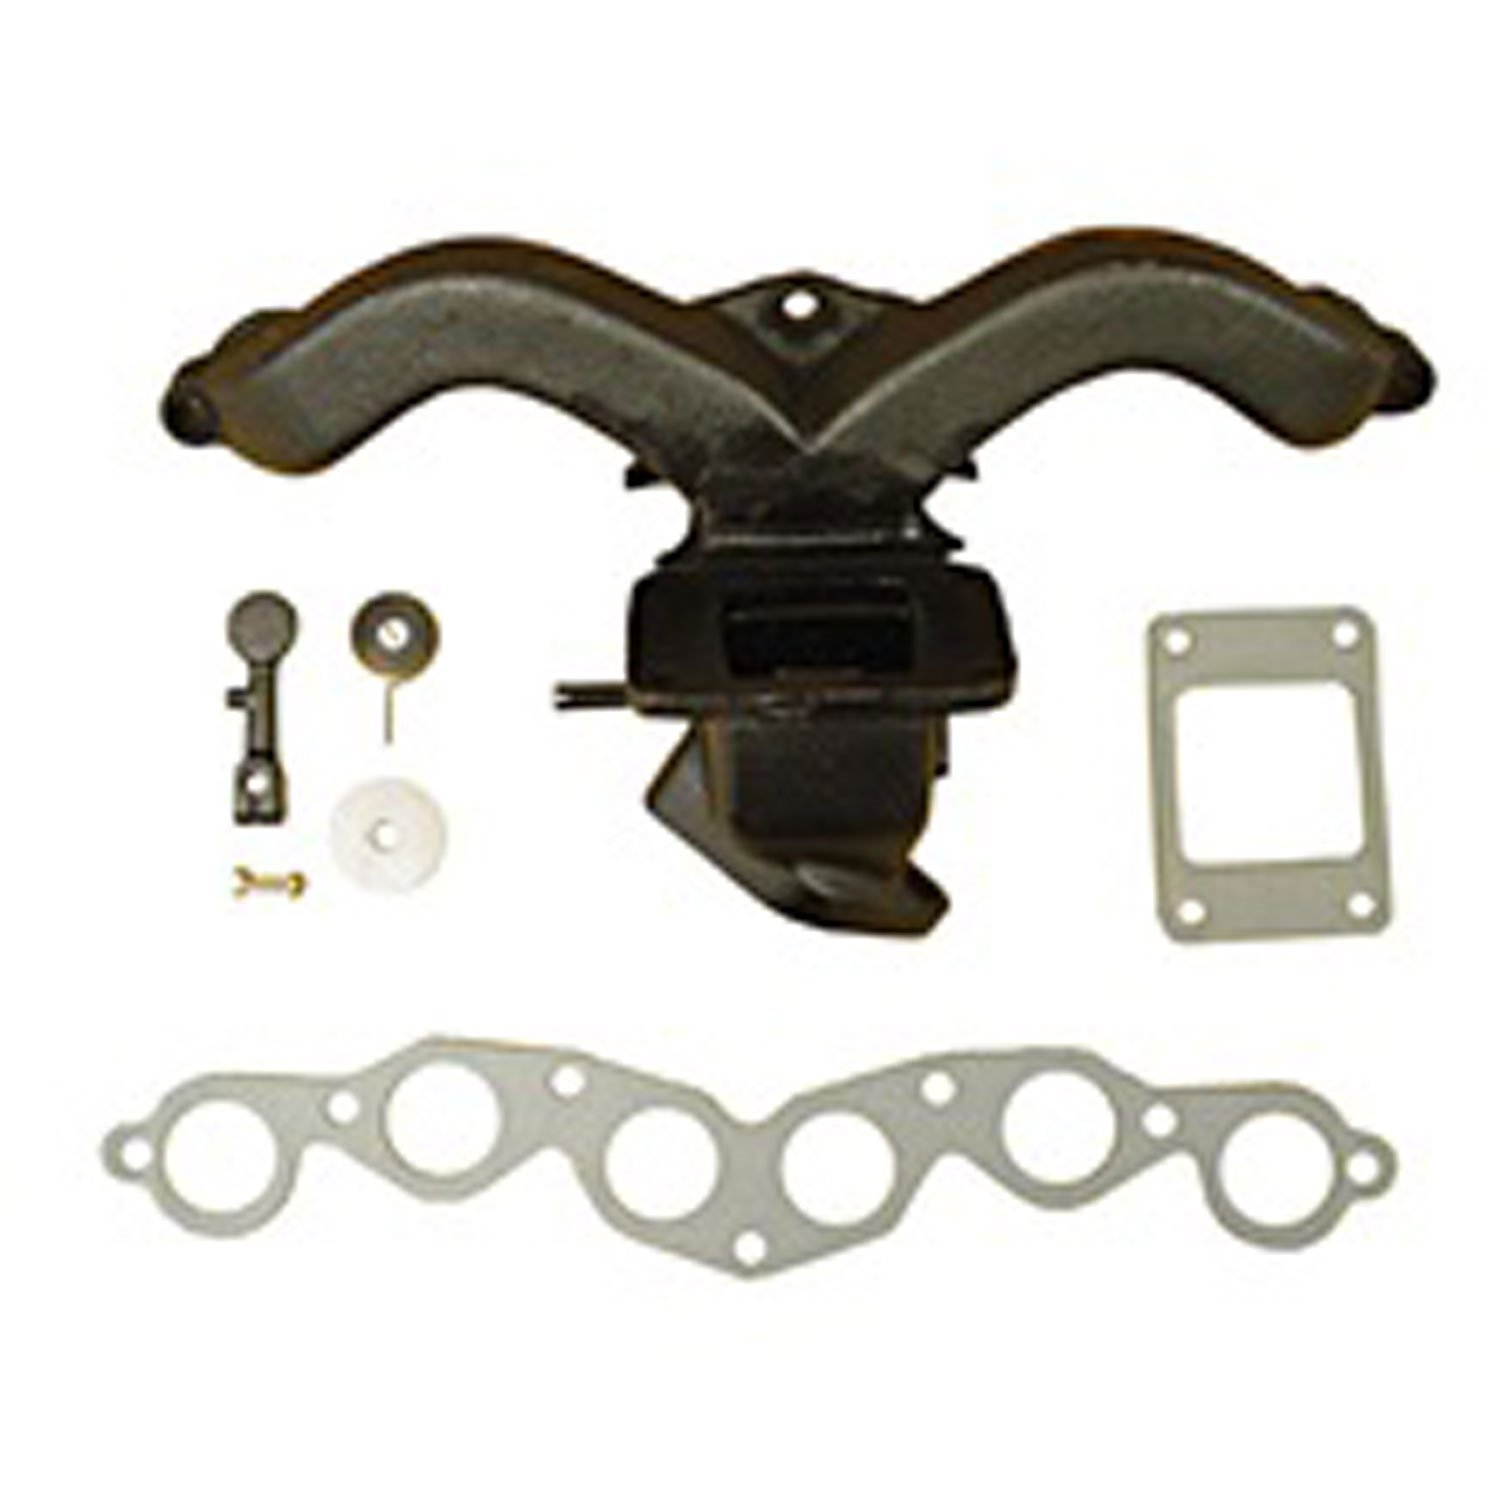 This exhaust manifold kit from Omix-ADA fits 41-53 Willys models with the 134 cubic inch L-head engine.